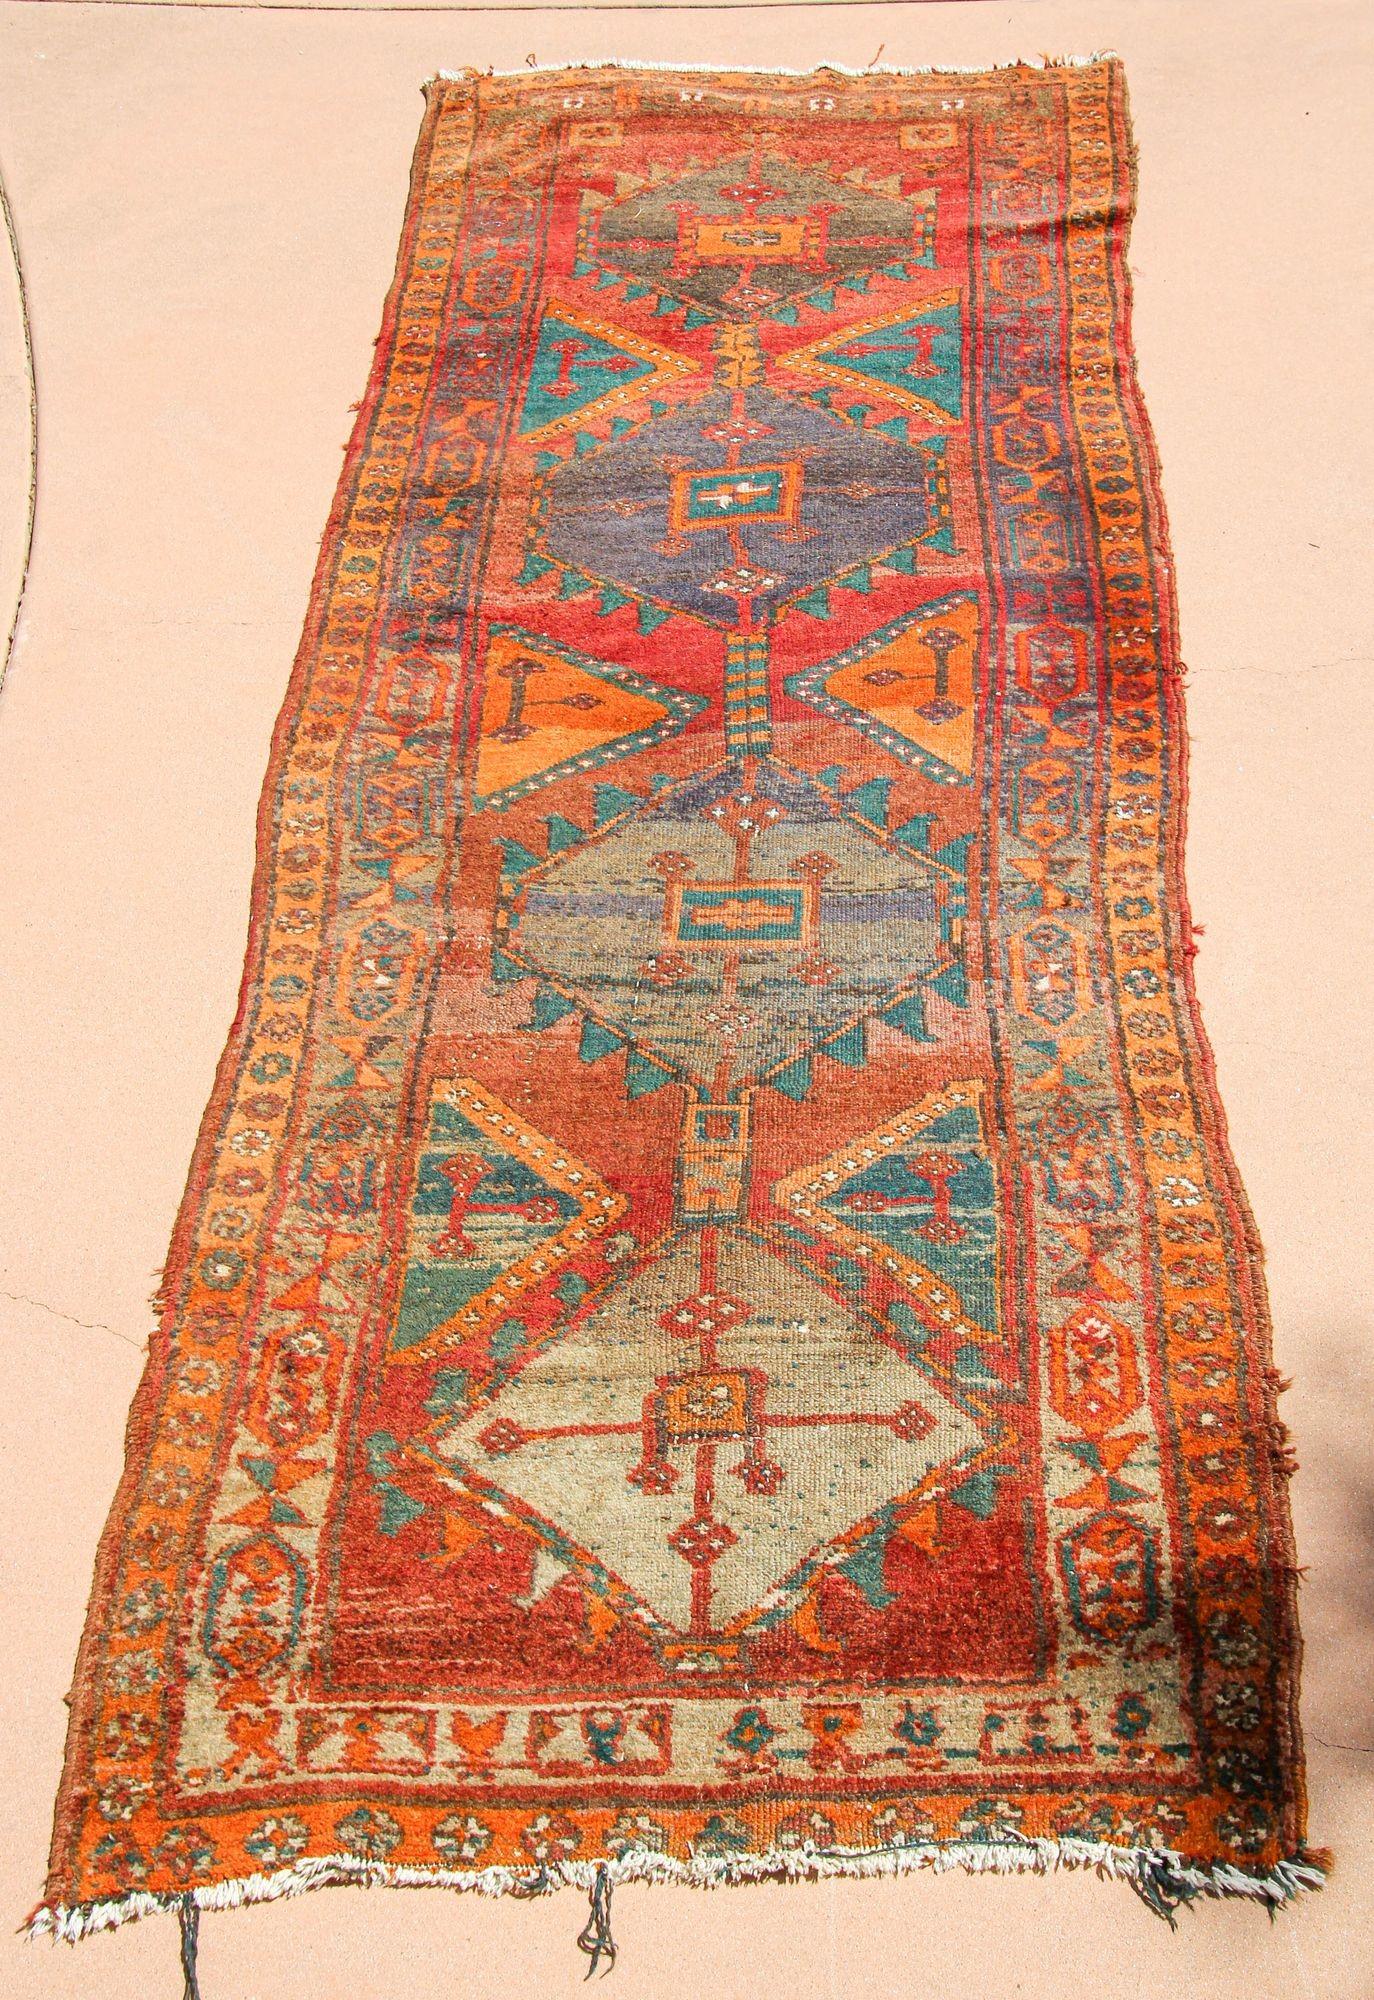 1950s Hand Knotted Vintage Carpet Rug Runner from Turkey.
These rugs have a rich history dating back centuries and are deeply intertwined with the country's culture and heritage.
Hand knotted runner from Eastern Turkey, vintage Middle Eastern rug,